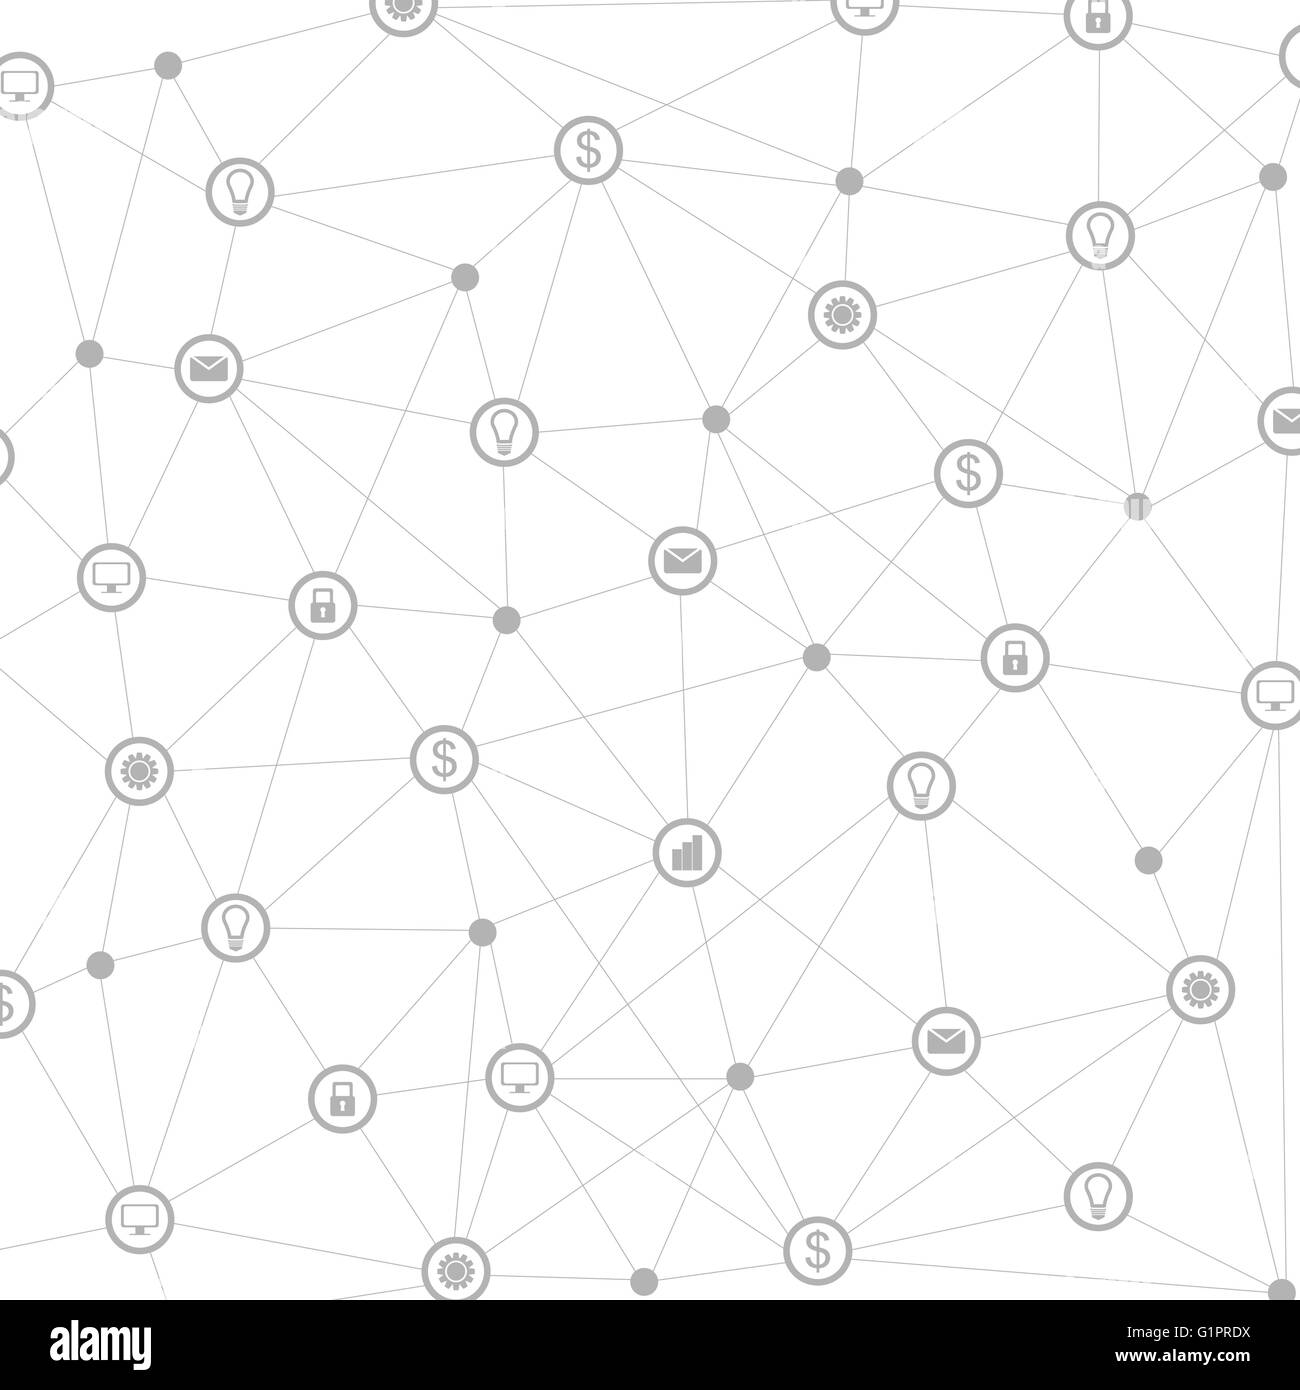 Light grey abstract background with communication icons. Vector dark network tech design Stock Vector